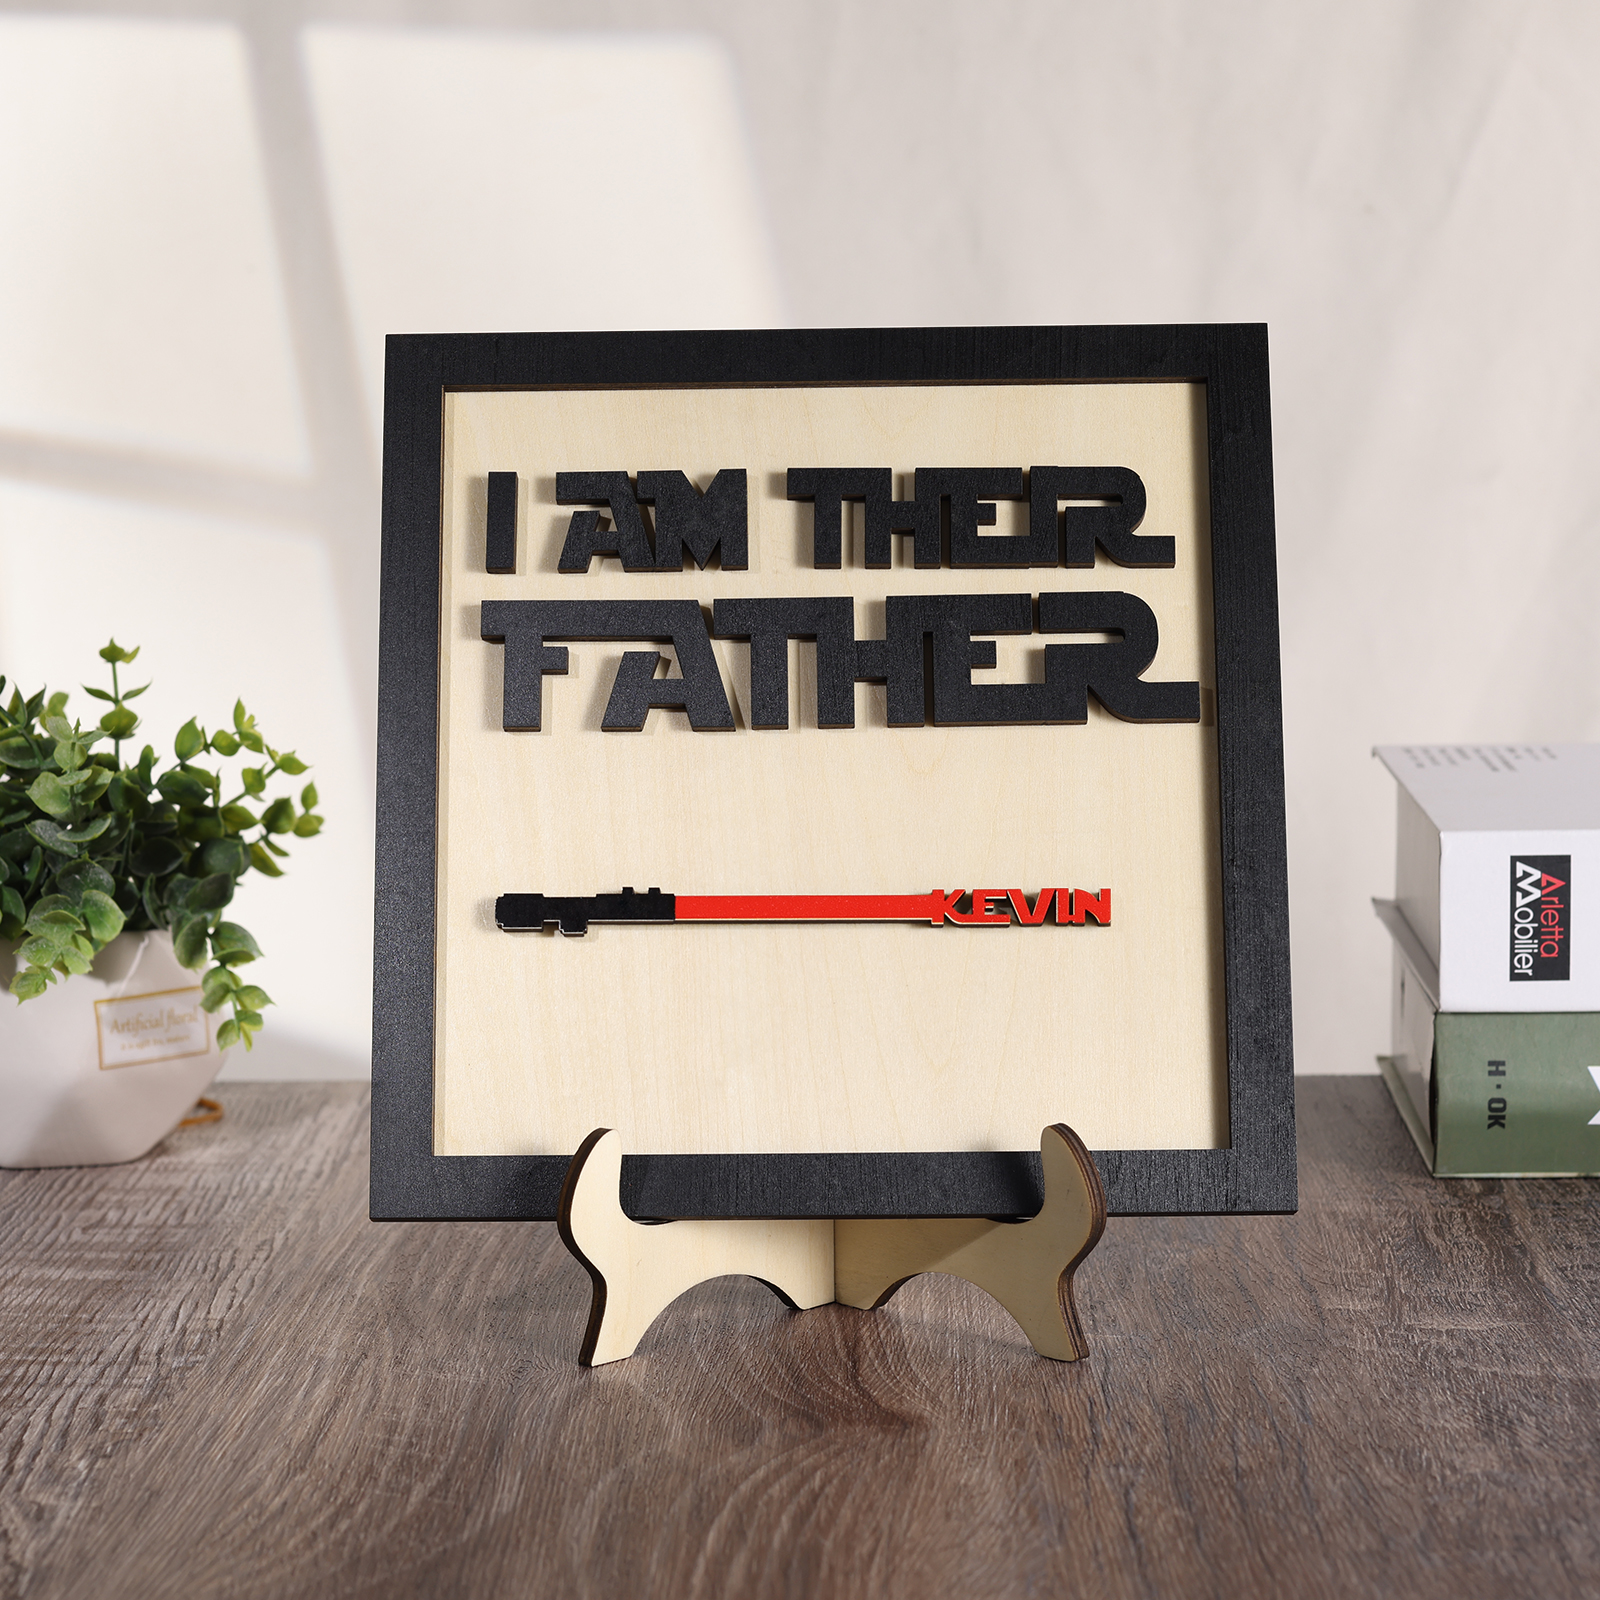 Personalized Star Wars Sign Father's Day Gifts - I AM THEIR FATHER - Wood Sign with 1 Name